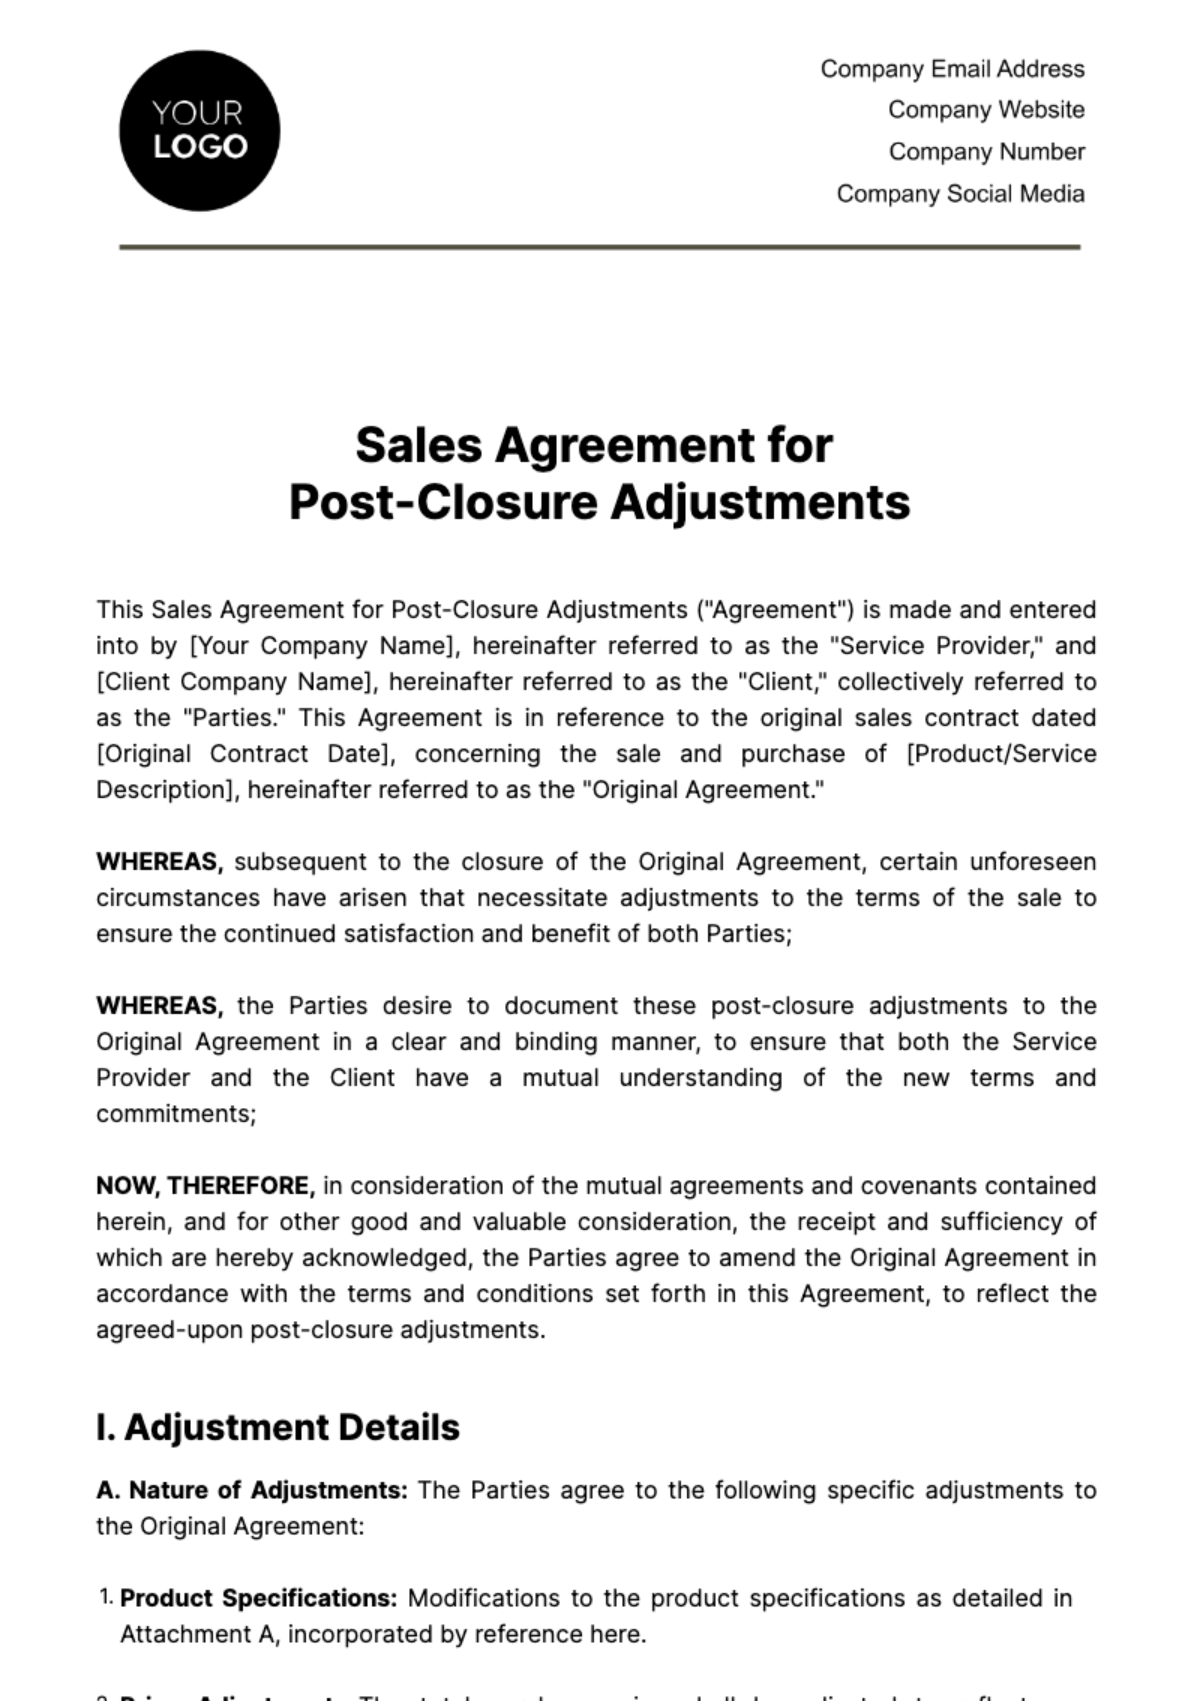 Free Sales Agreement for Post-Closure Adjustments Template